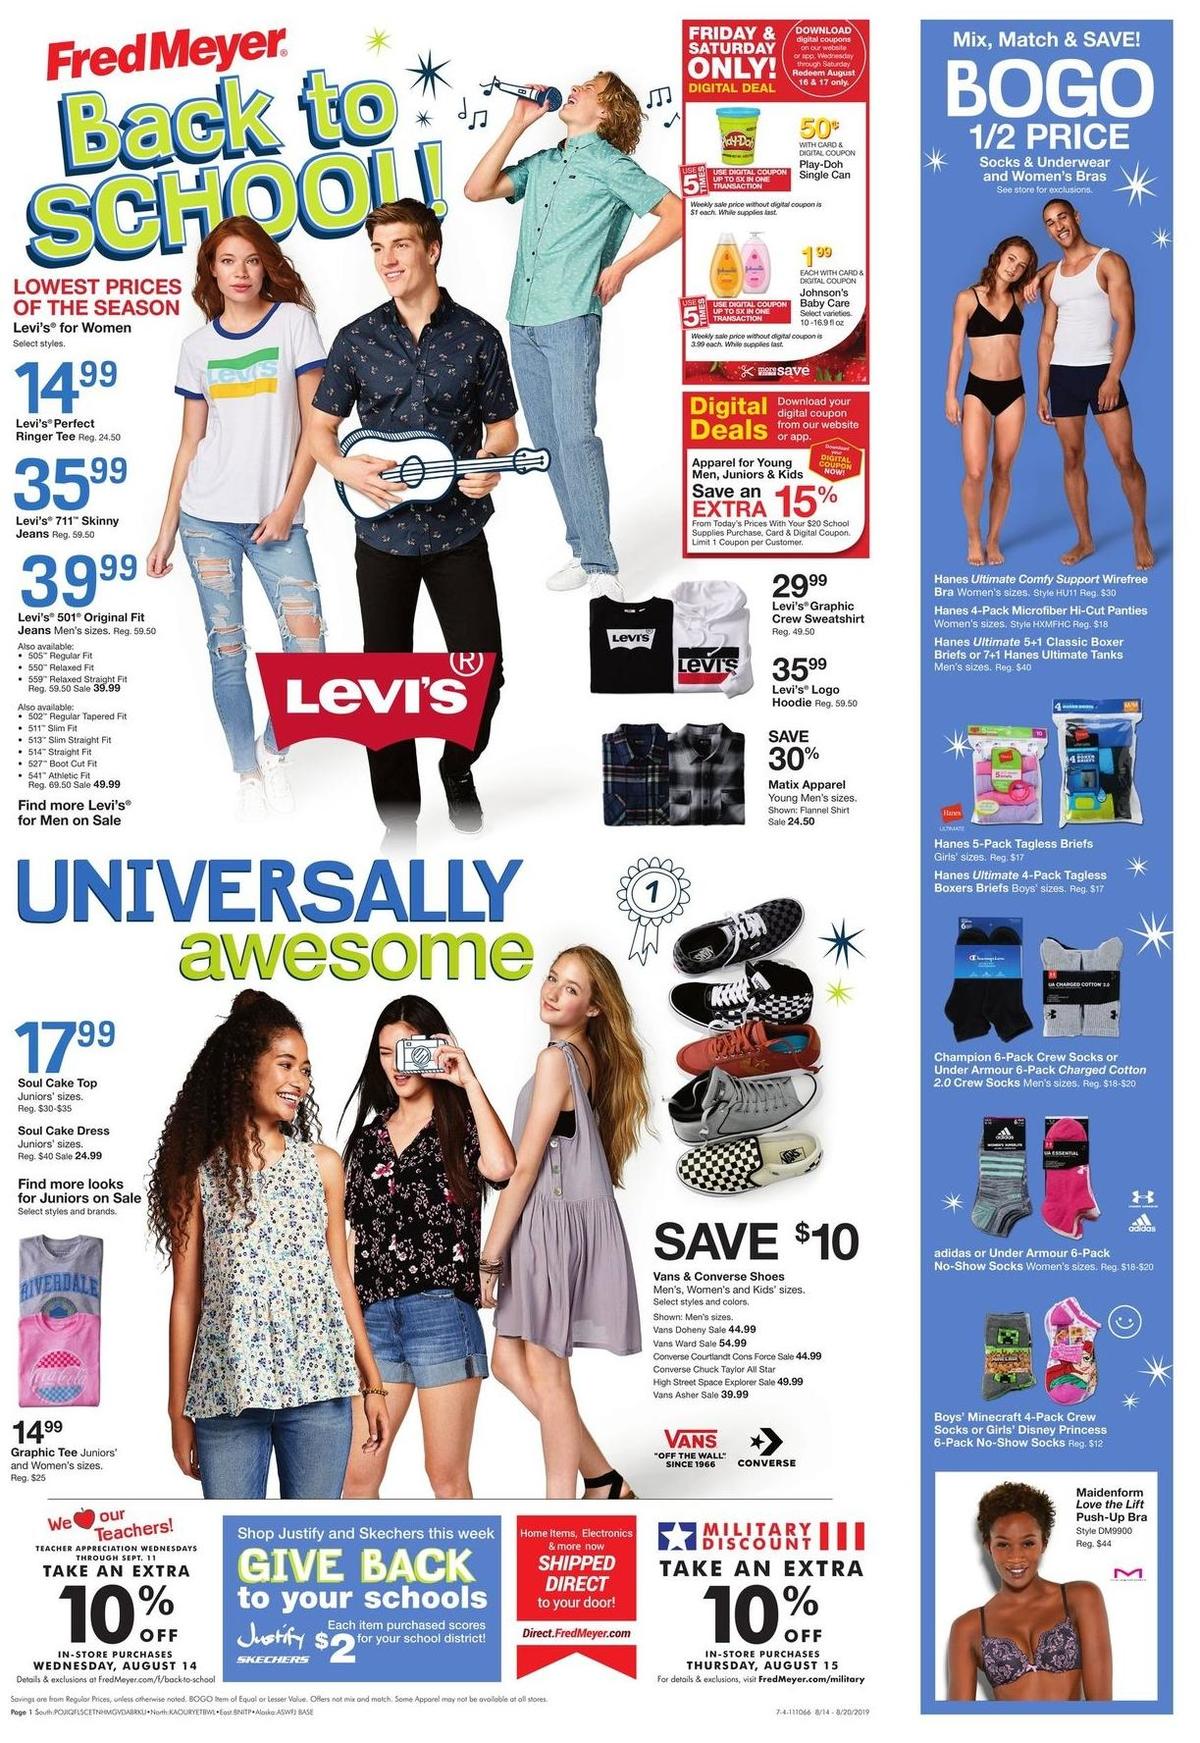 Fred Meyer Back to School Weekly Ad & Specials from August 14